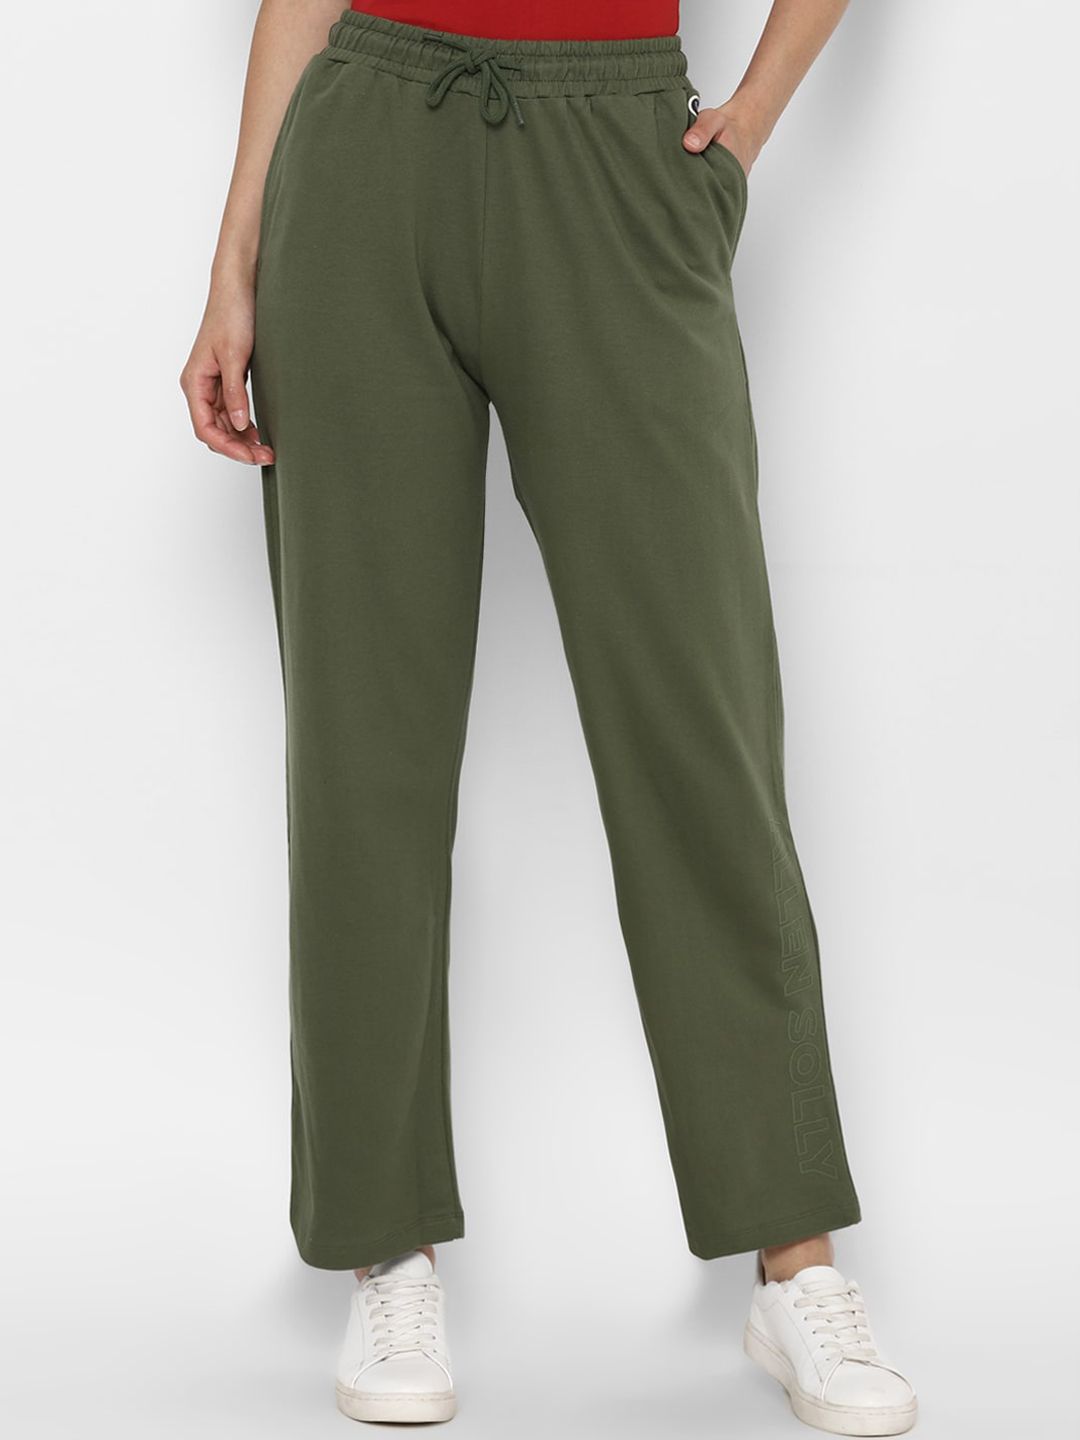 Allen Solly Woman Women Olive Green Regular Fit Solid Parallel Trousers Price in India